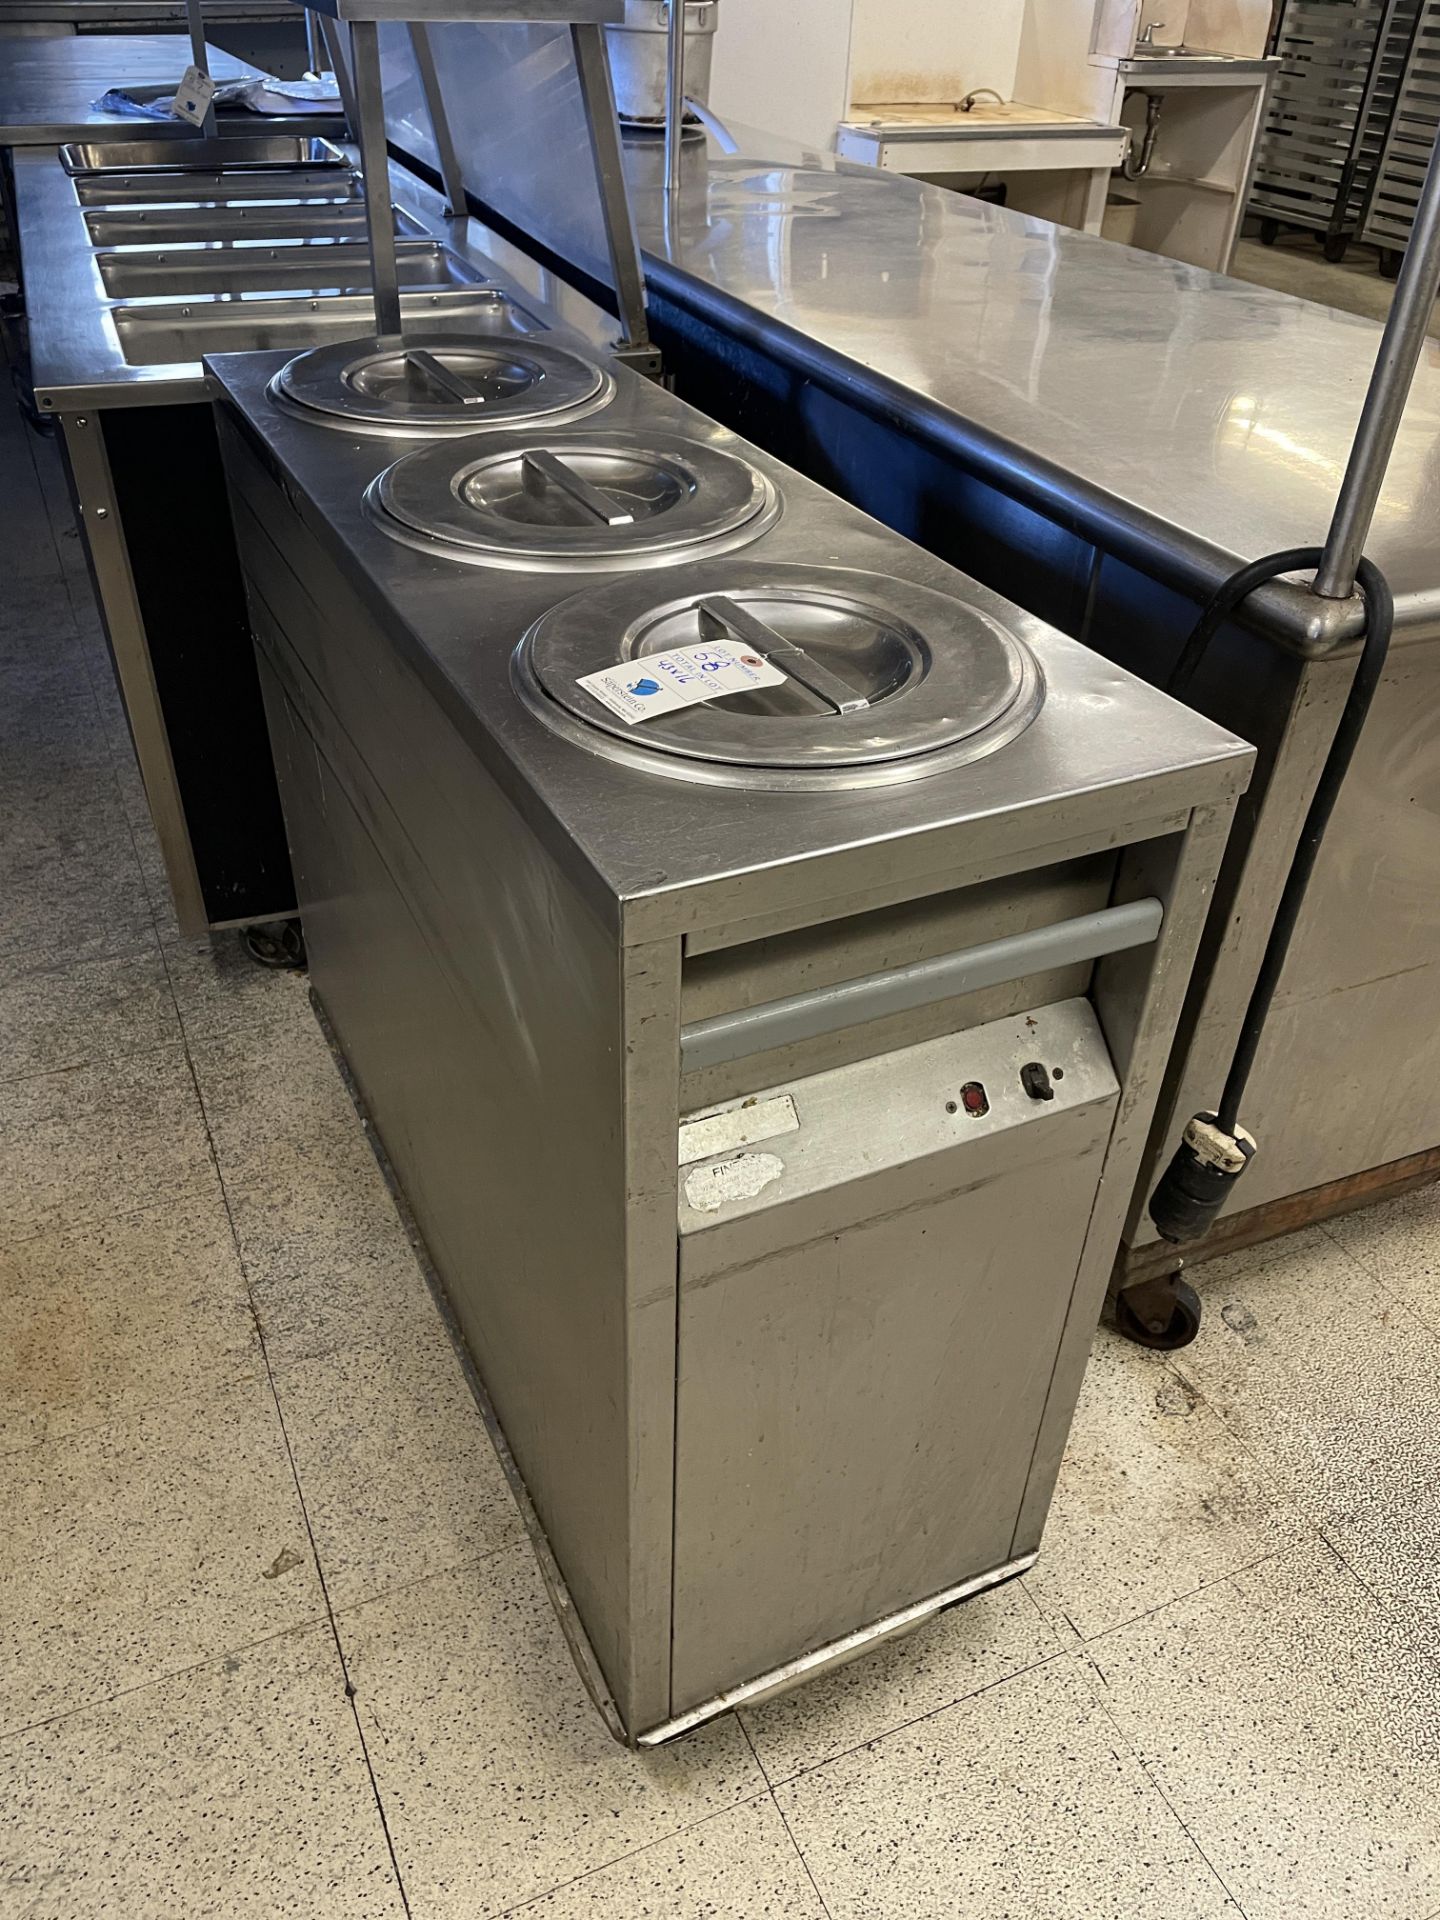 3 Station Soup Serving Unit, Portable & Electric (All Manufacturing info is gone)